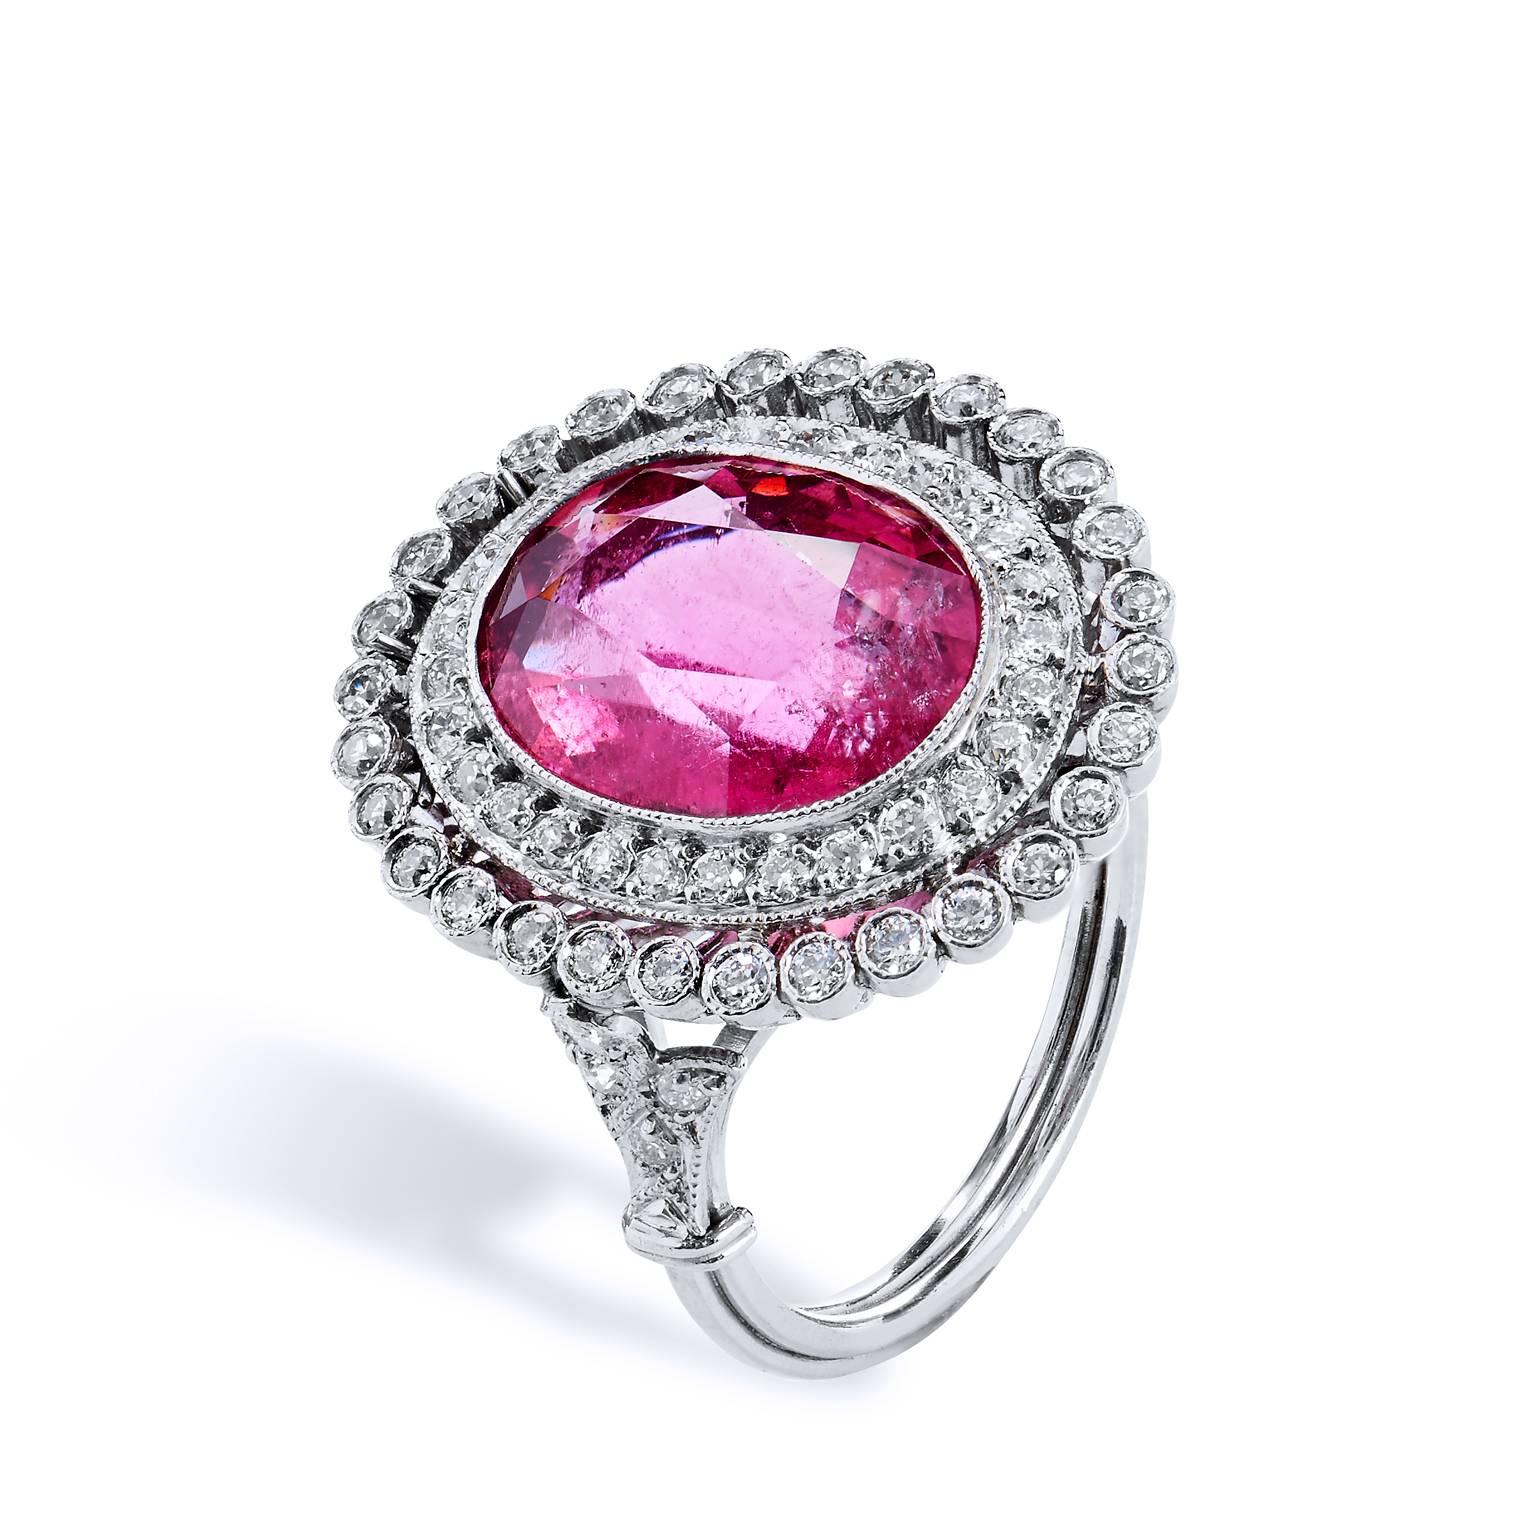 Old European Cut Art Deco Inspired 5.96 Carat Pink Tourmaline and Diamond Halo Platinum Ring 7.5 For Sale